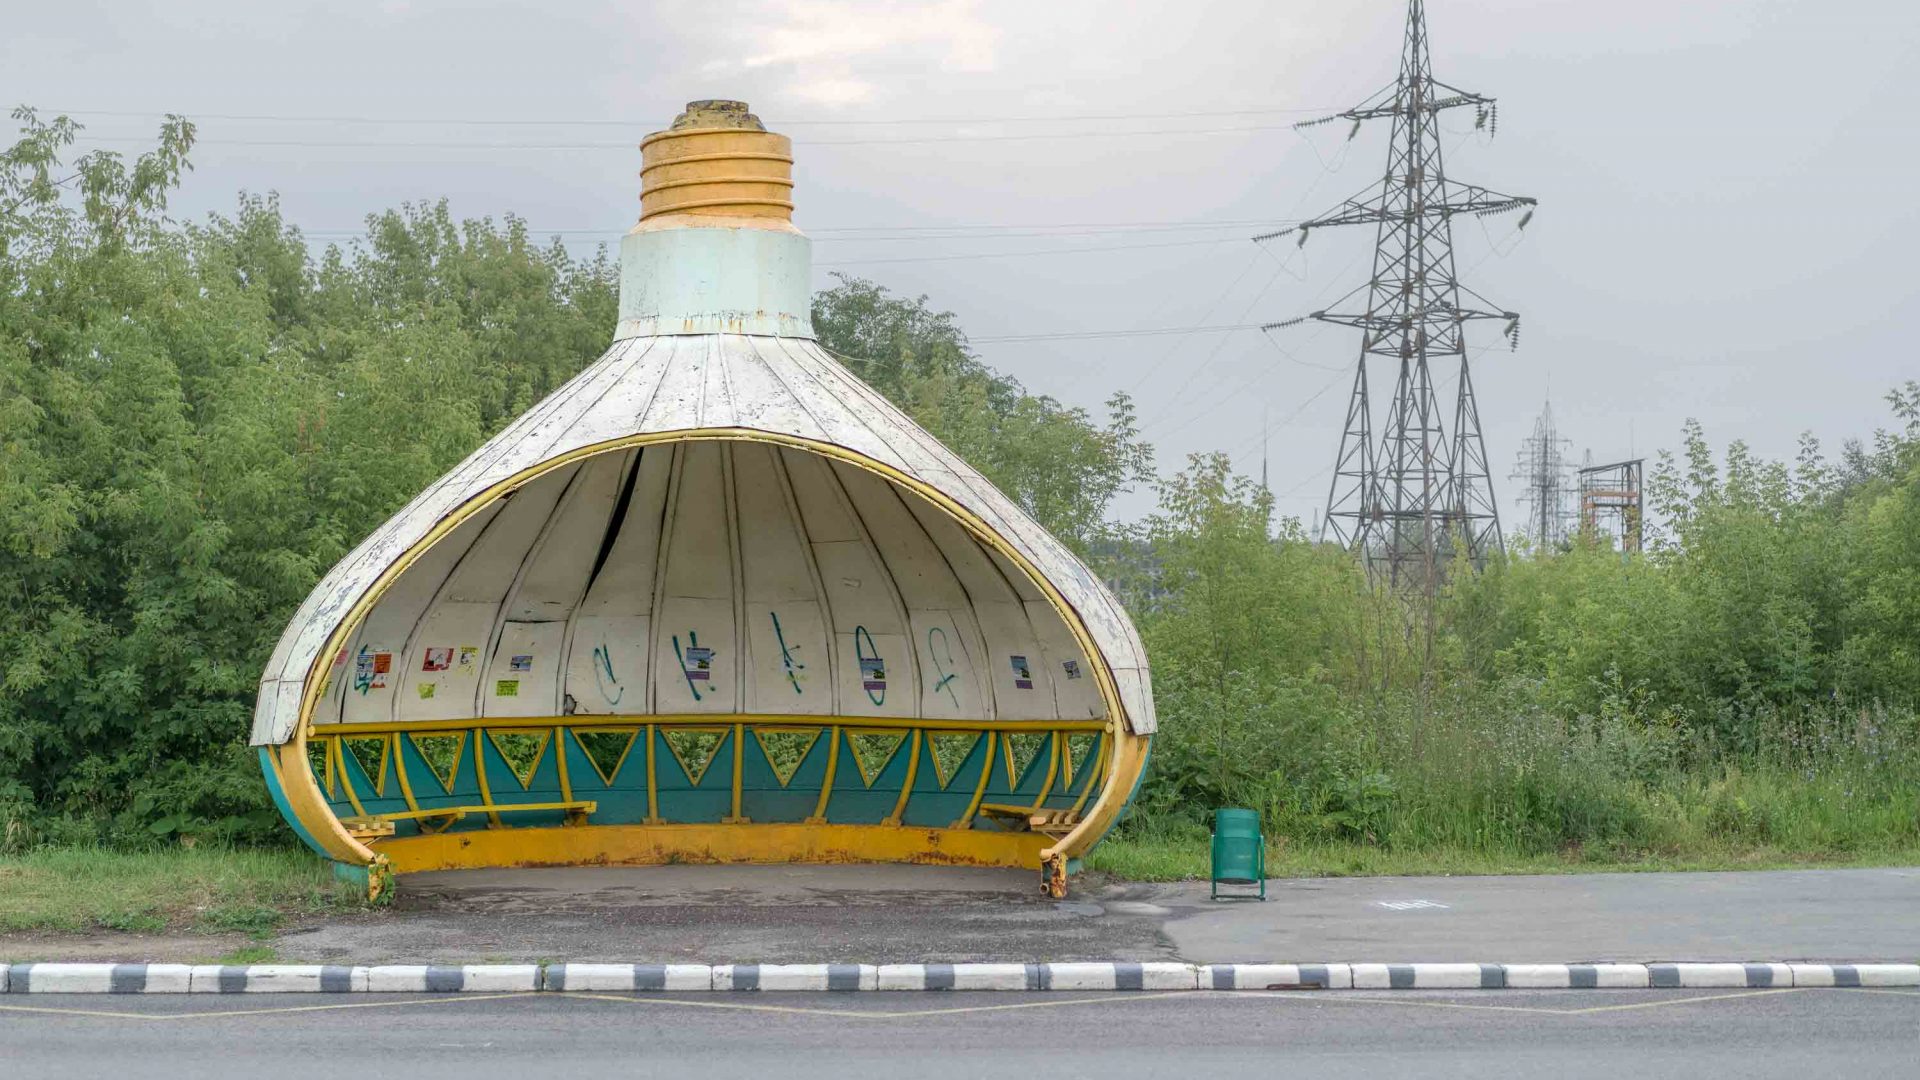 A bus stop in Saransk, Russia.